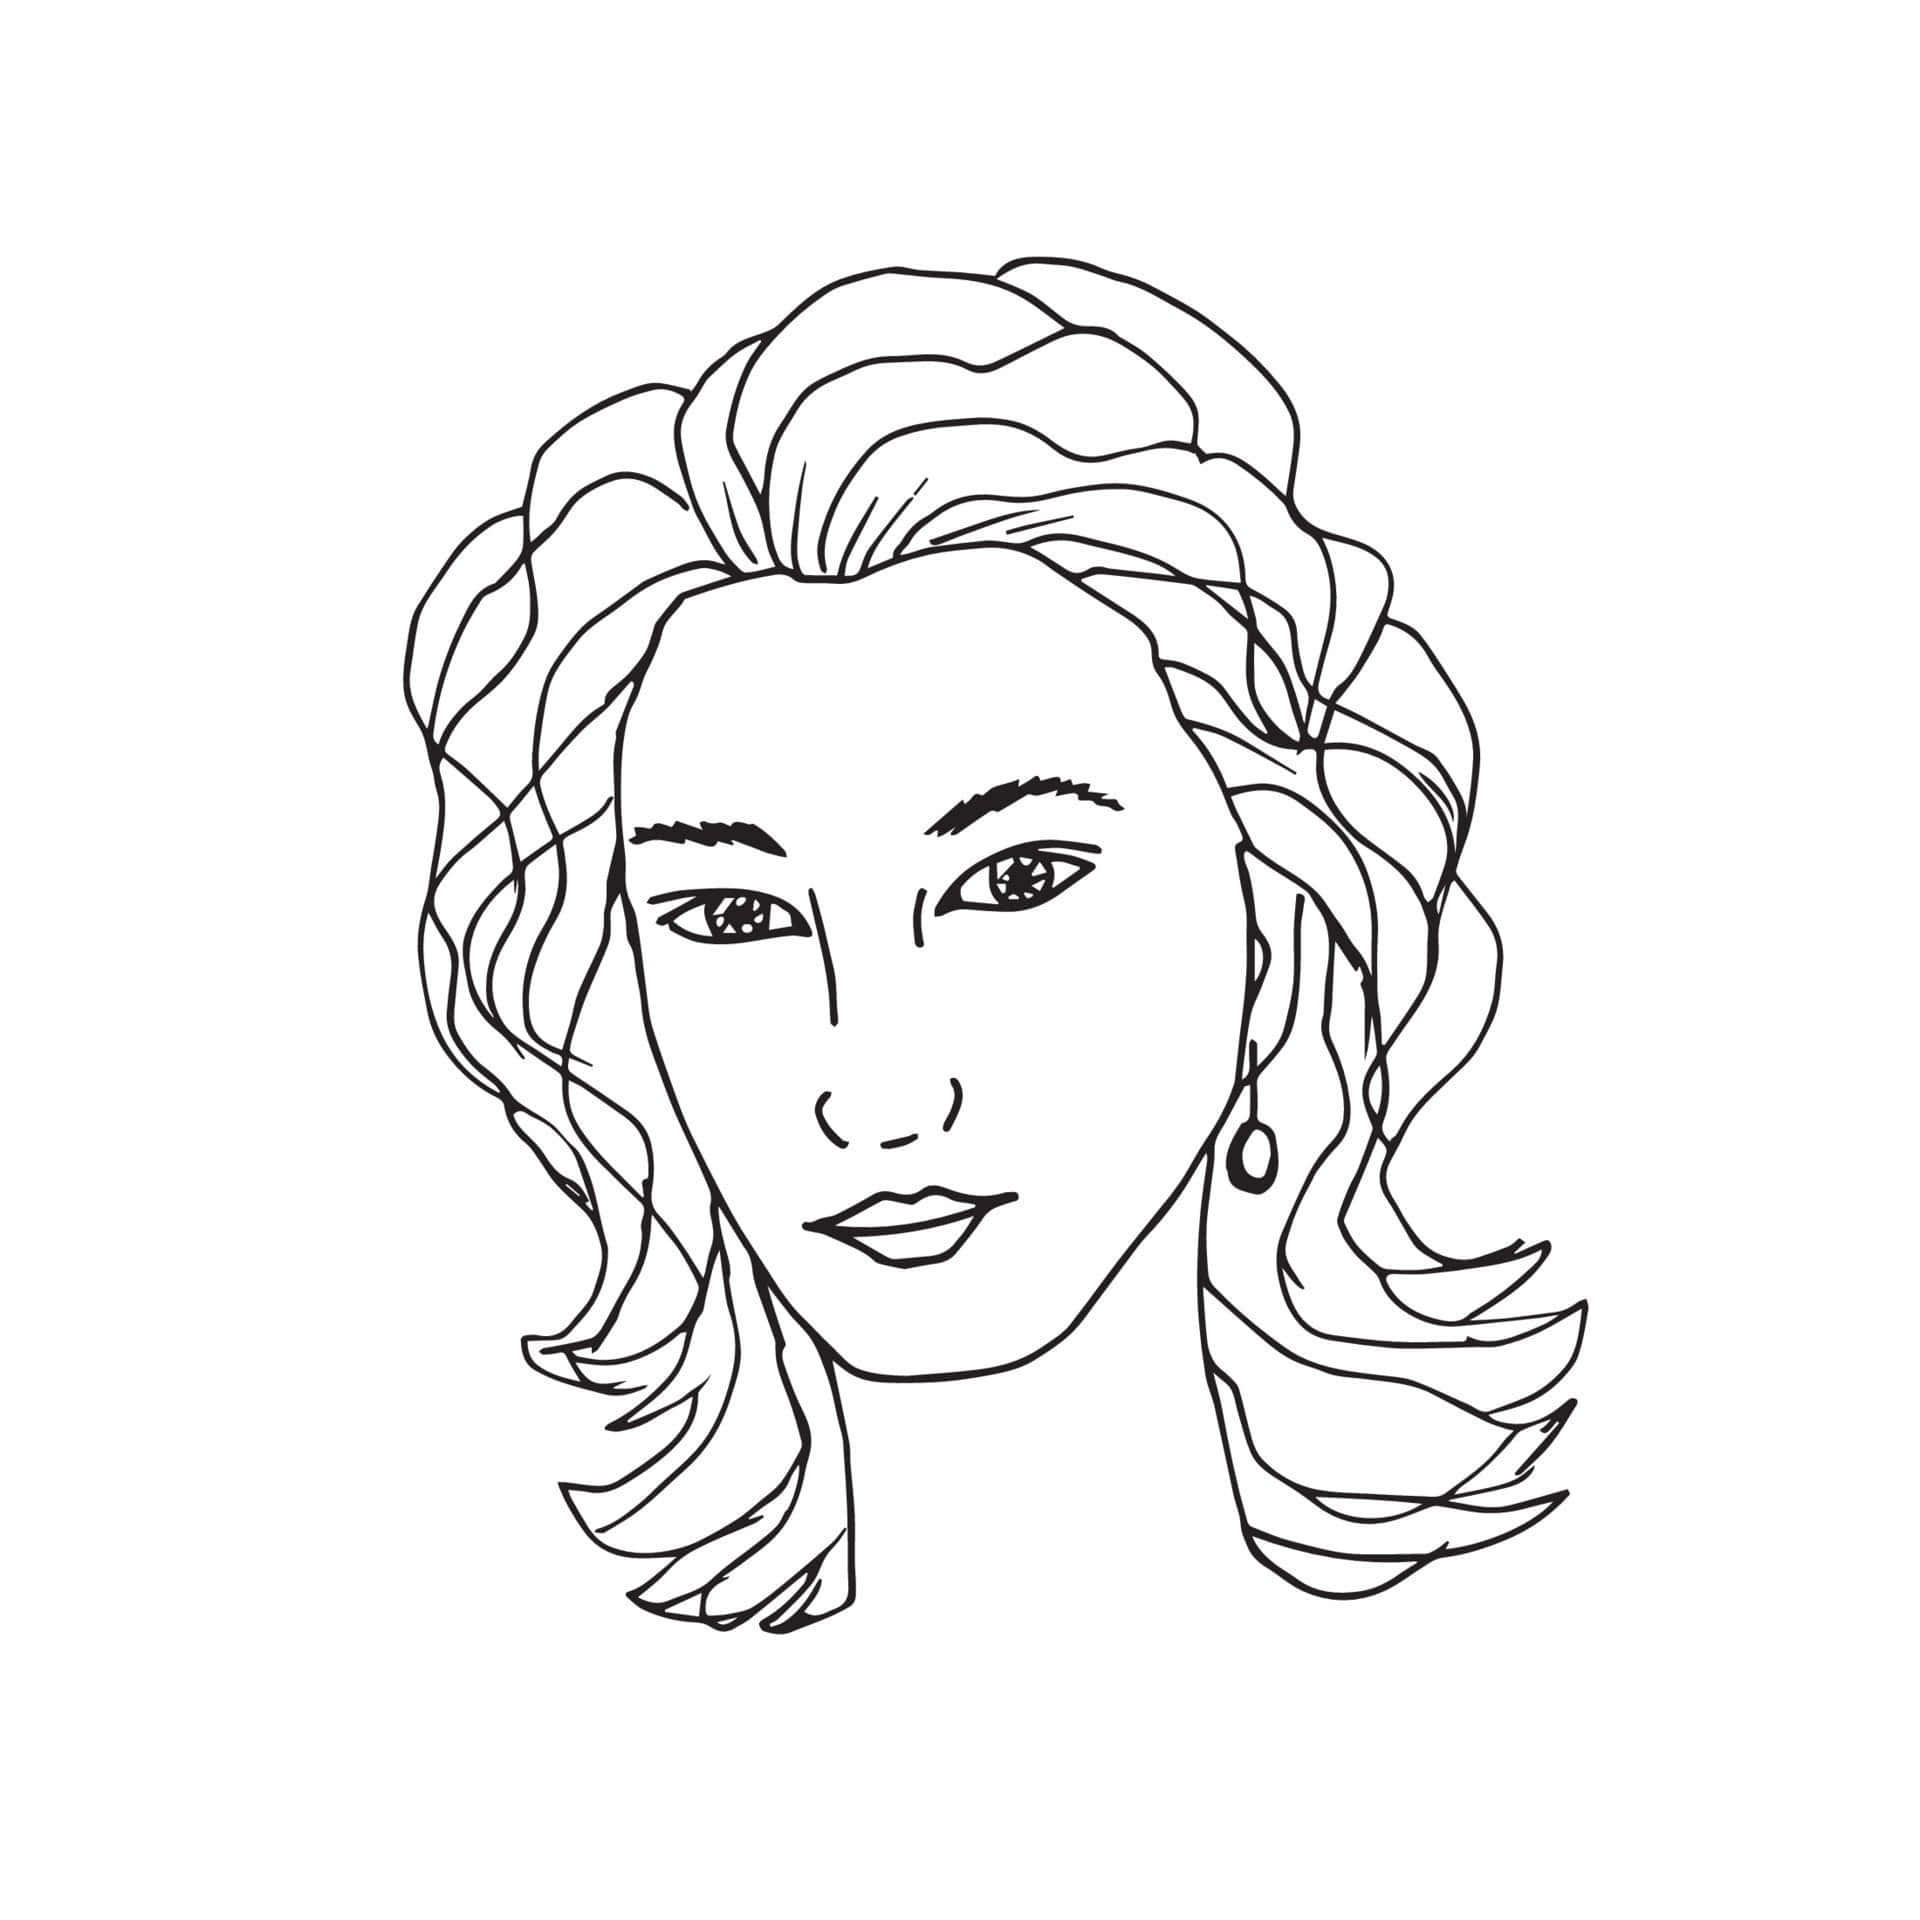 A Woman's Face Drawn In A Single Line